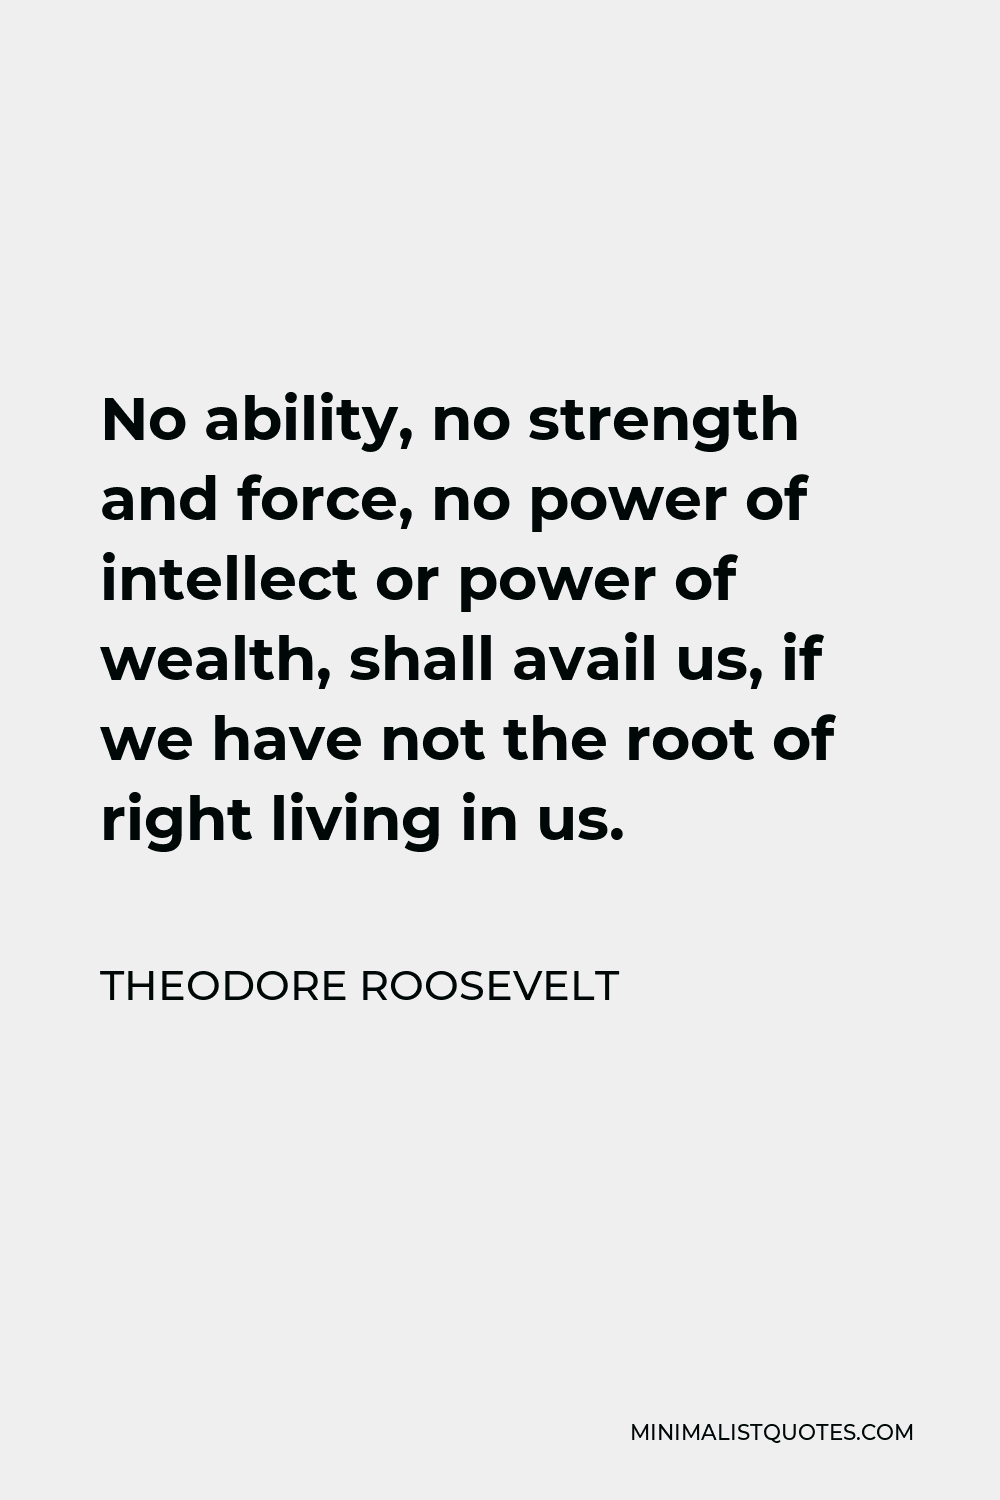 Theodore Roosevelt Quote - No ability, no strength and force, no power of intellect or power of wealth, shall avail us, if we have not the root of right living in us.